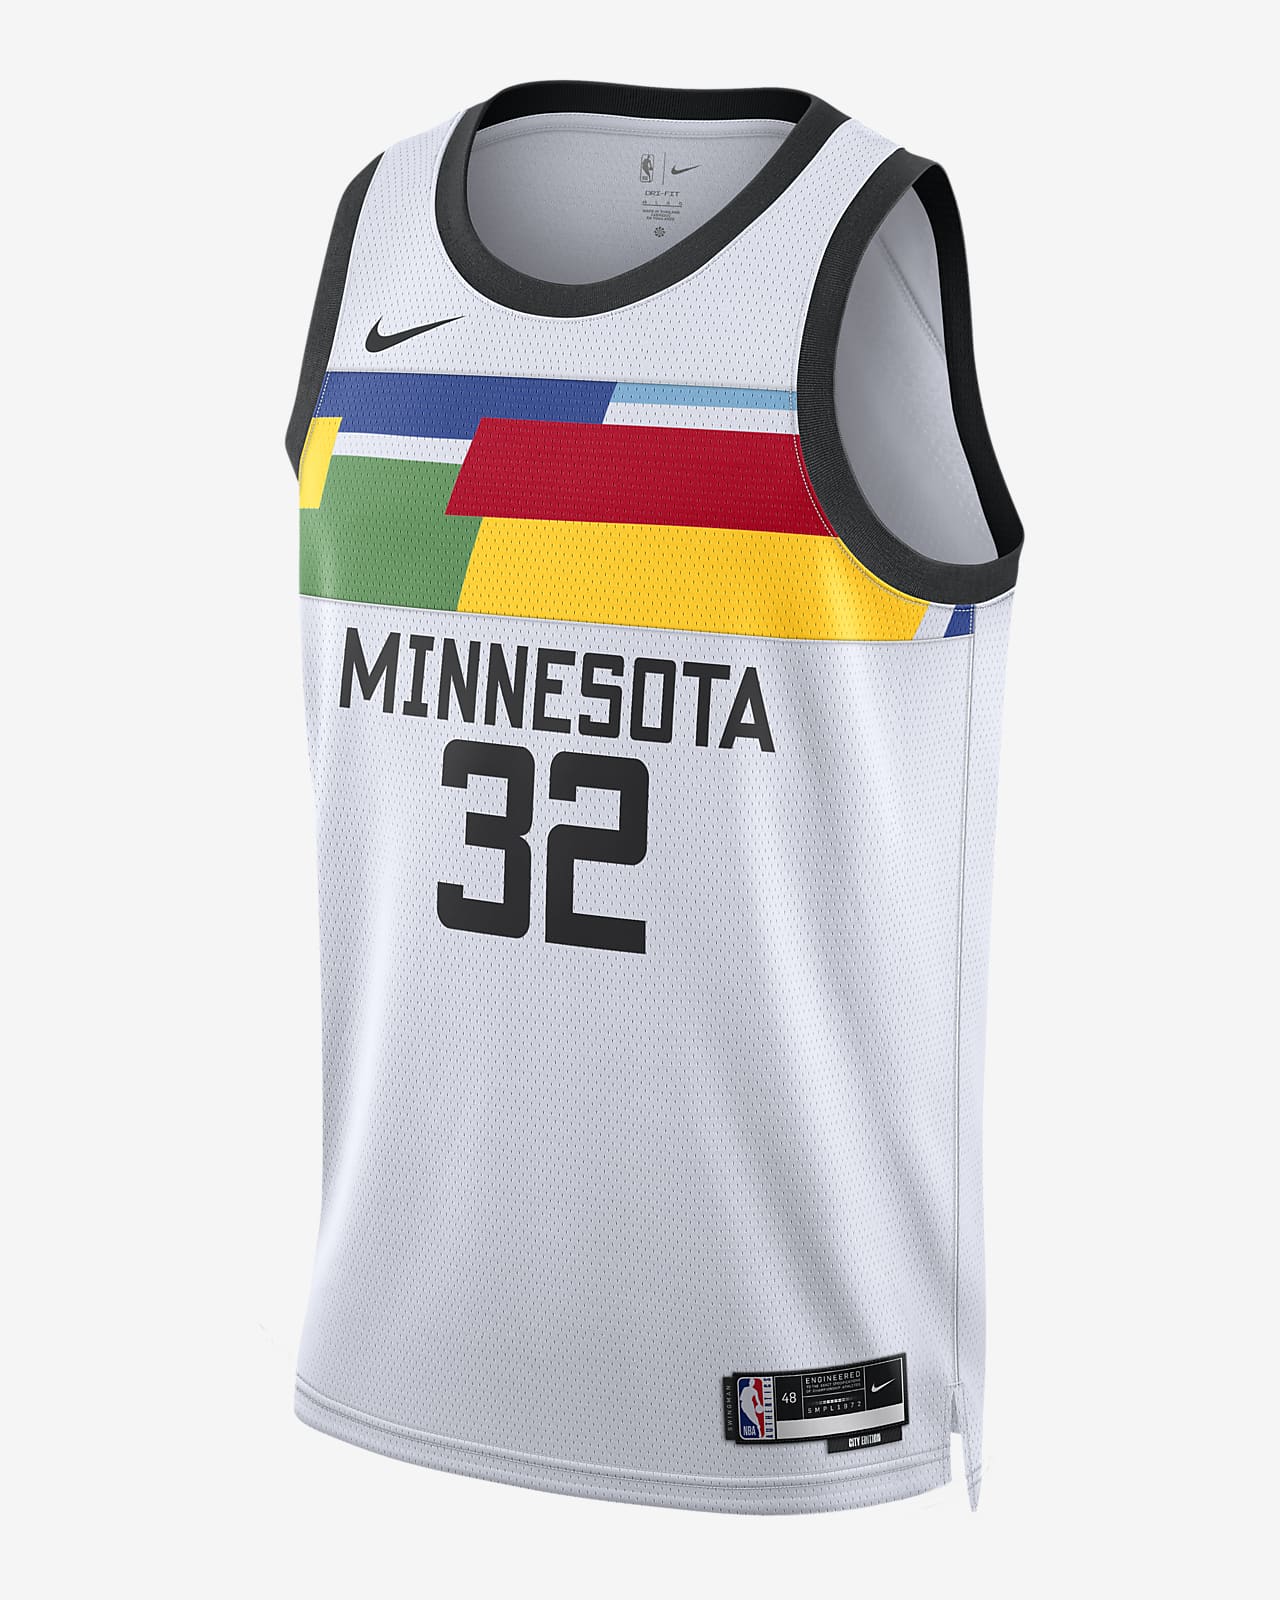 karl anthony towns jersey nike